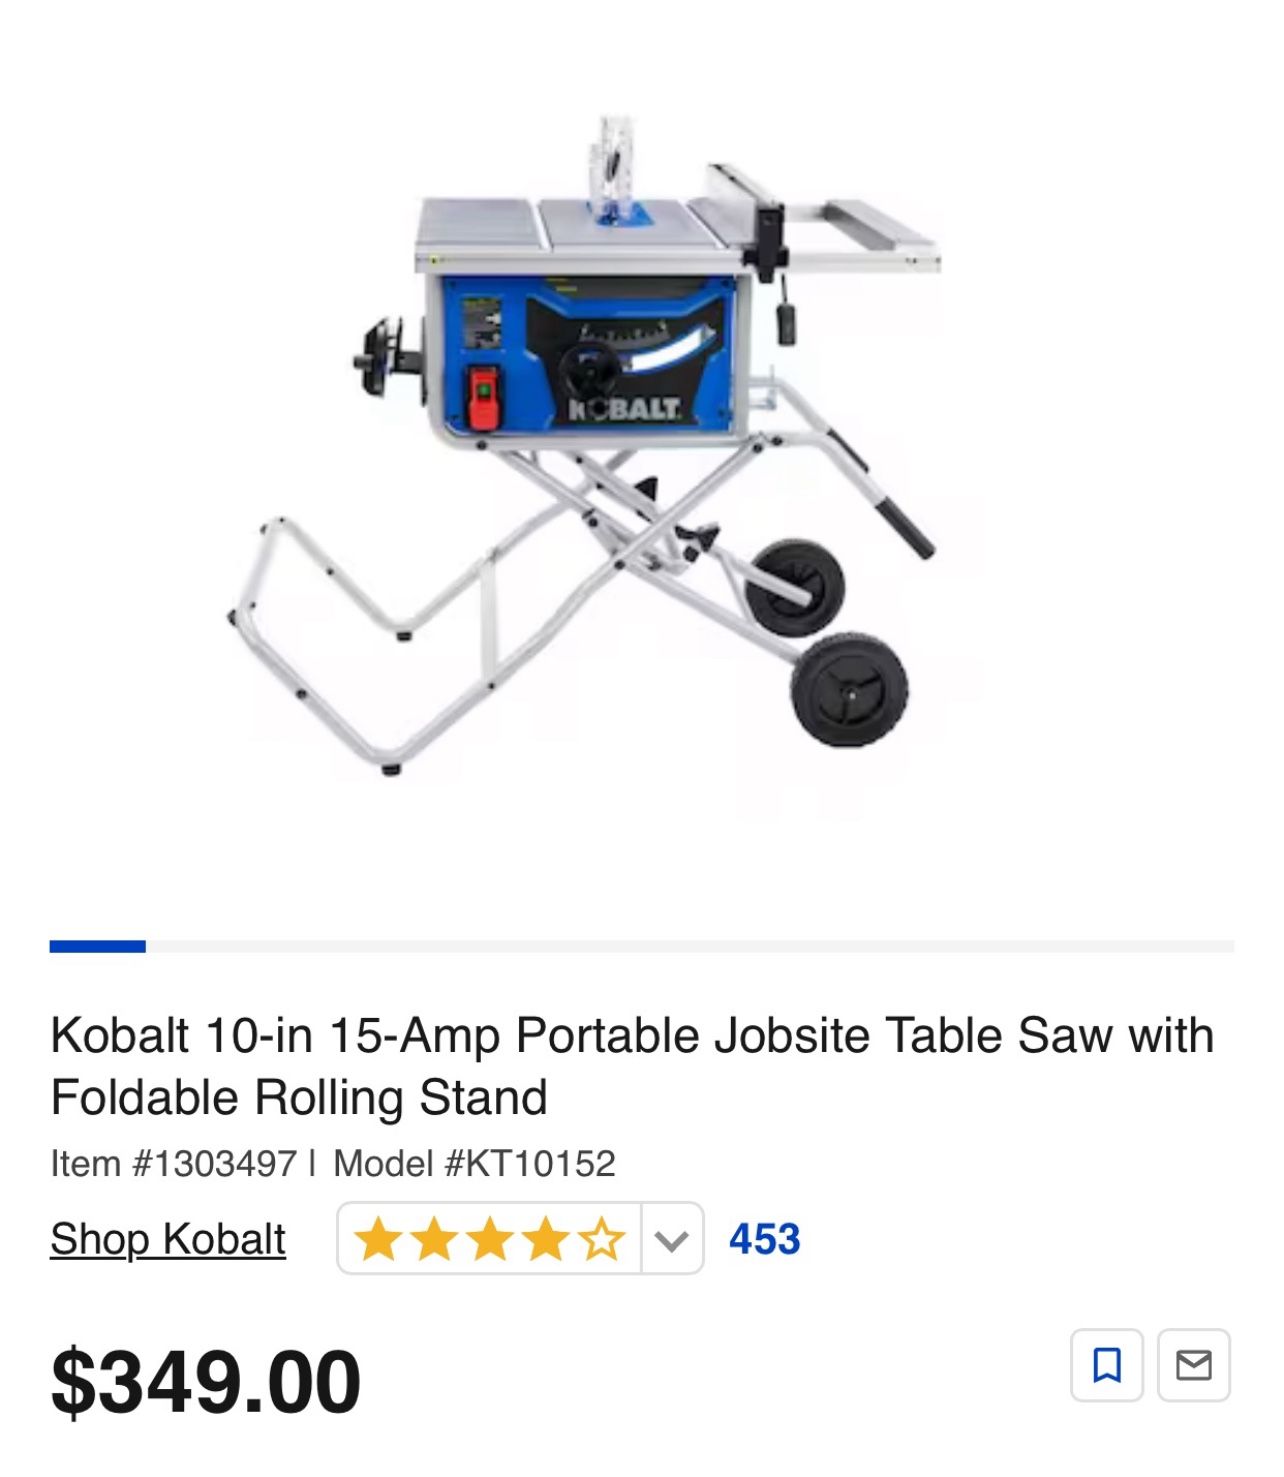 Kobalt 10-in 15-Amp Portable Jobsite Table Saw with Foldable Rolling Stand